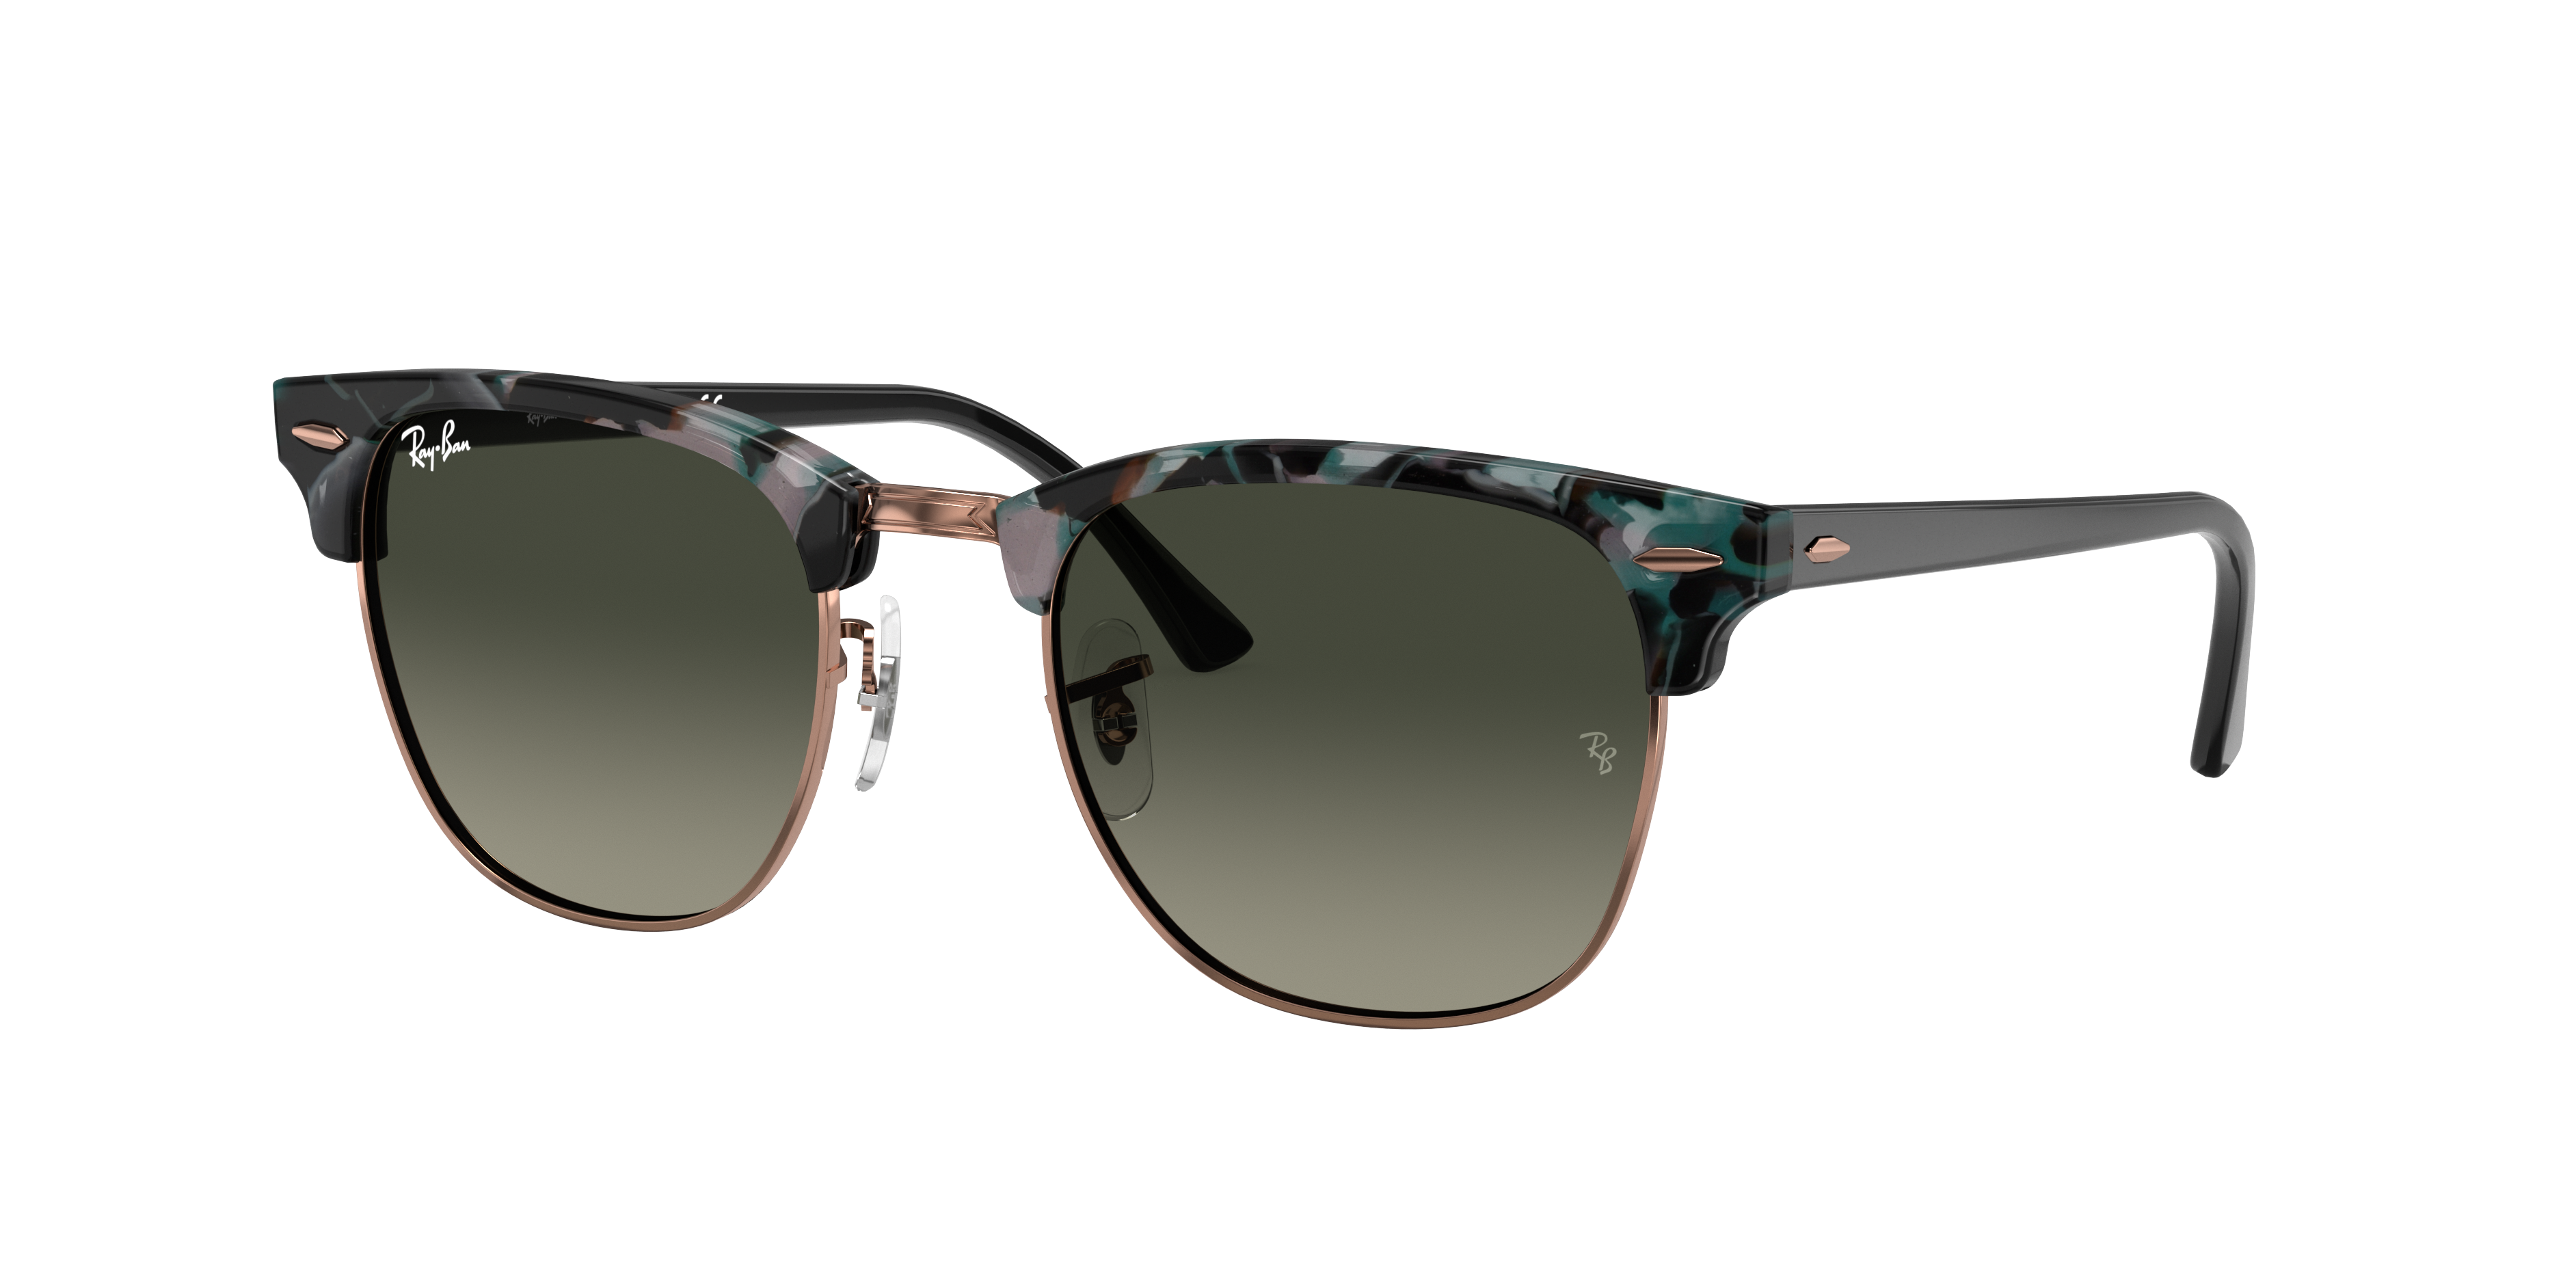 Ray-Ban 0RB3016 Sunglasses in Tortoise 